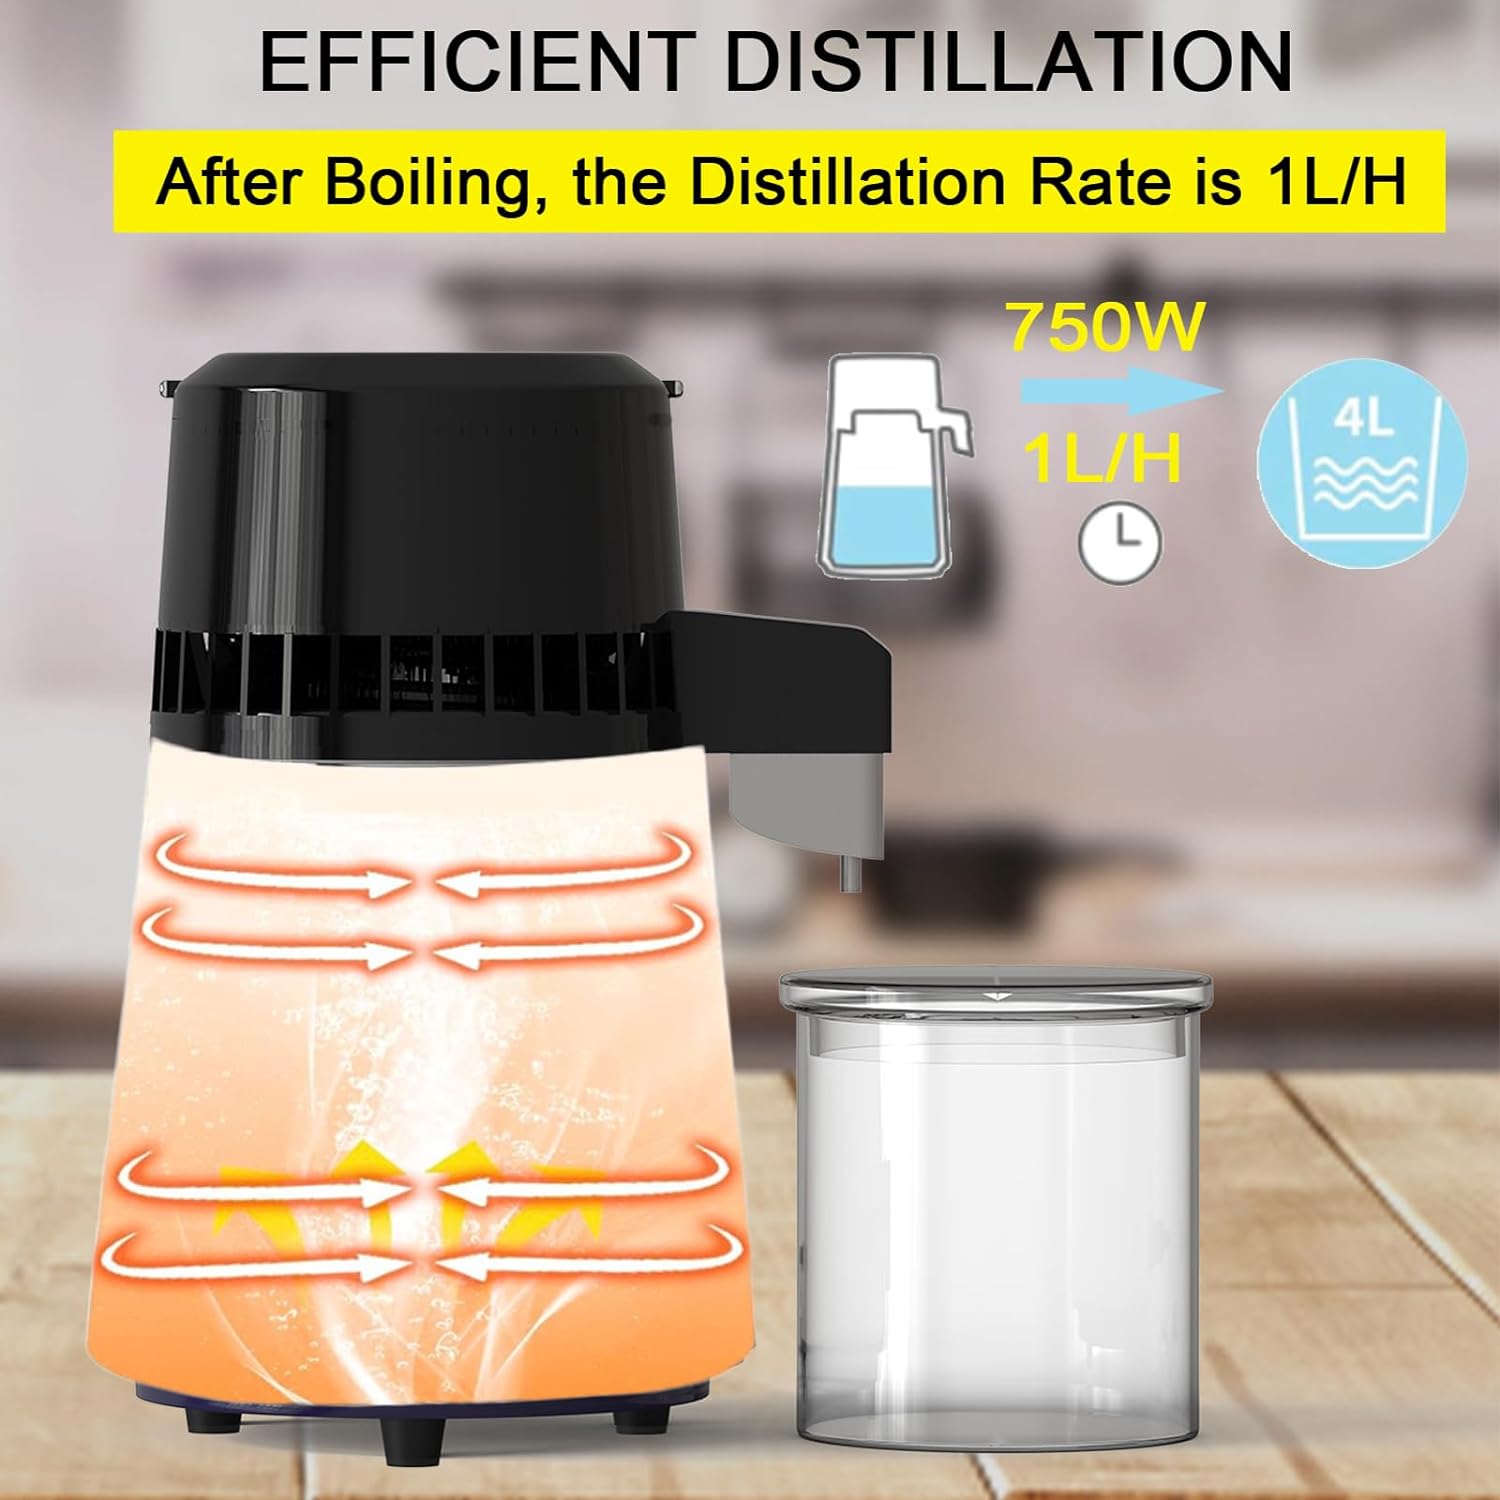 HOOLOO Multifunction Water Distiller 750W,Brewing, Distillation and Fermentation with One Click，with Essential Oil Separator